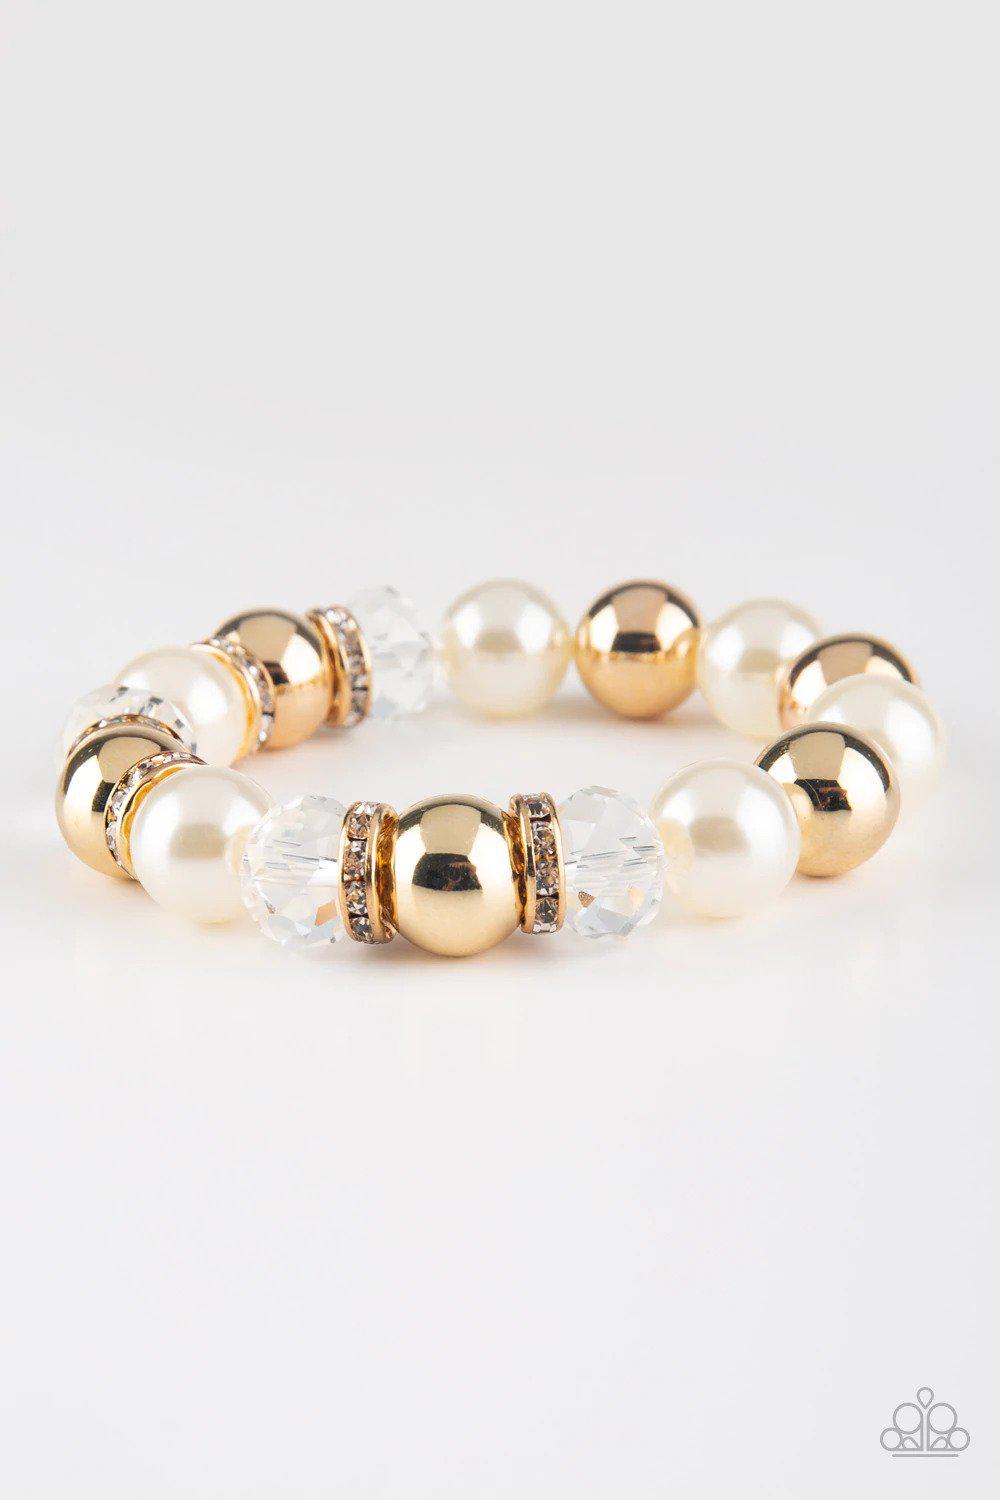 Camera Chic White and Gold Pearl Bracelet- lightbox - CarasShop.com - $5 Jewelry by Cara Jewels